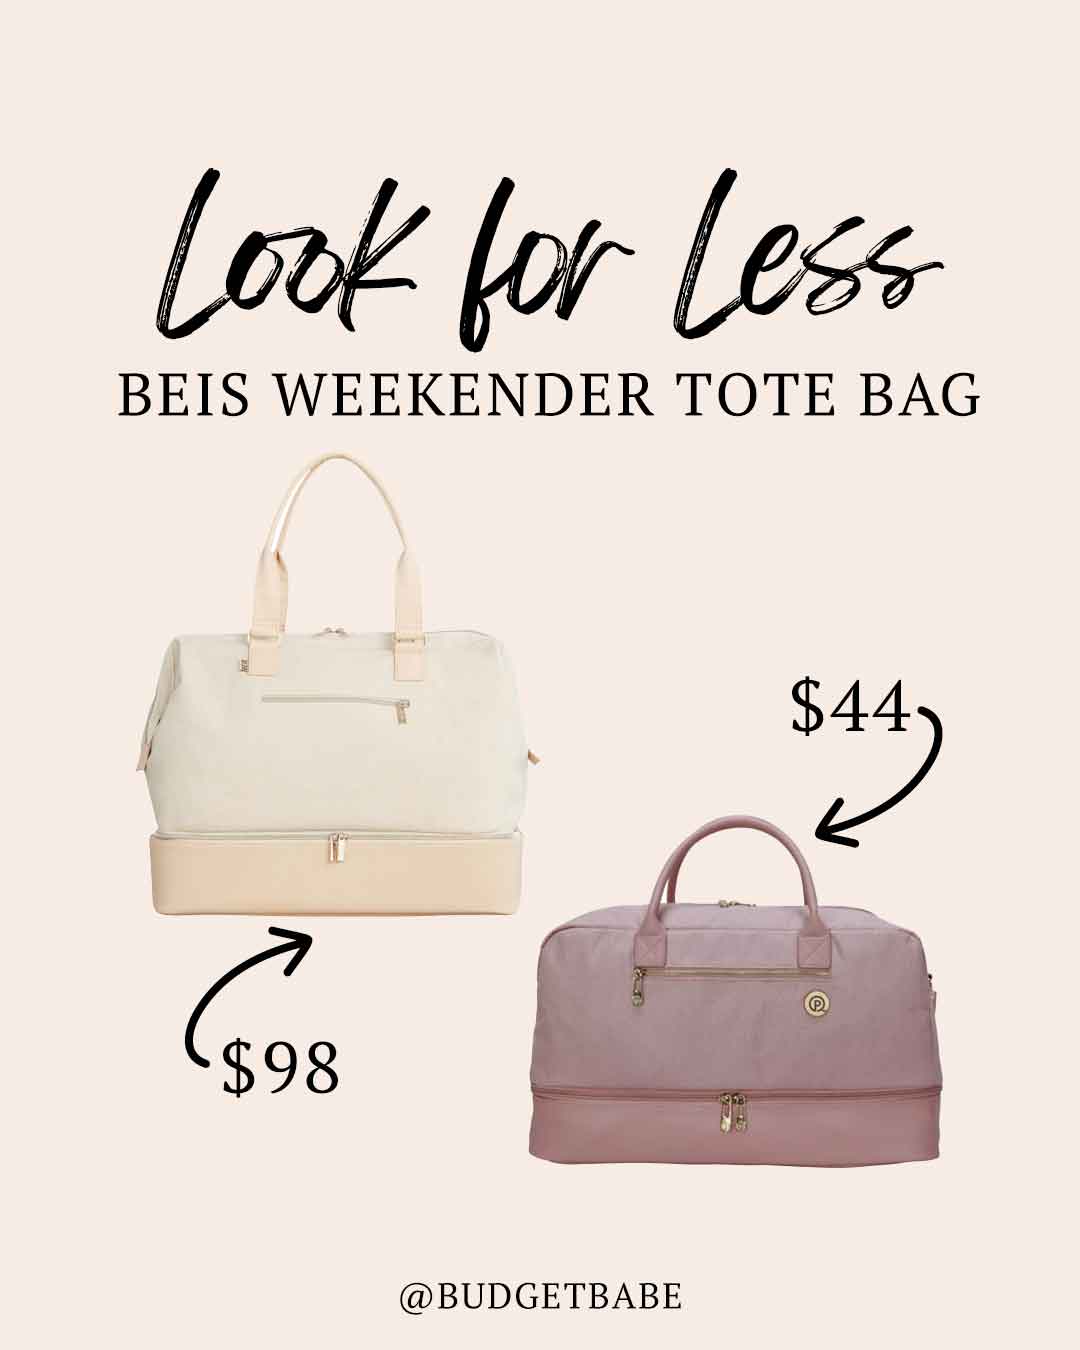 Beis weekender tote bag dupe look for less